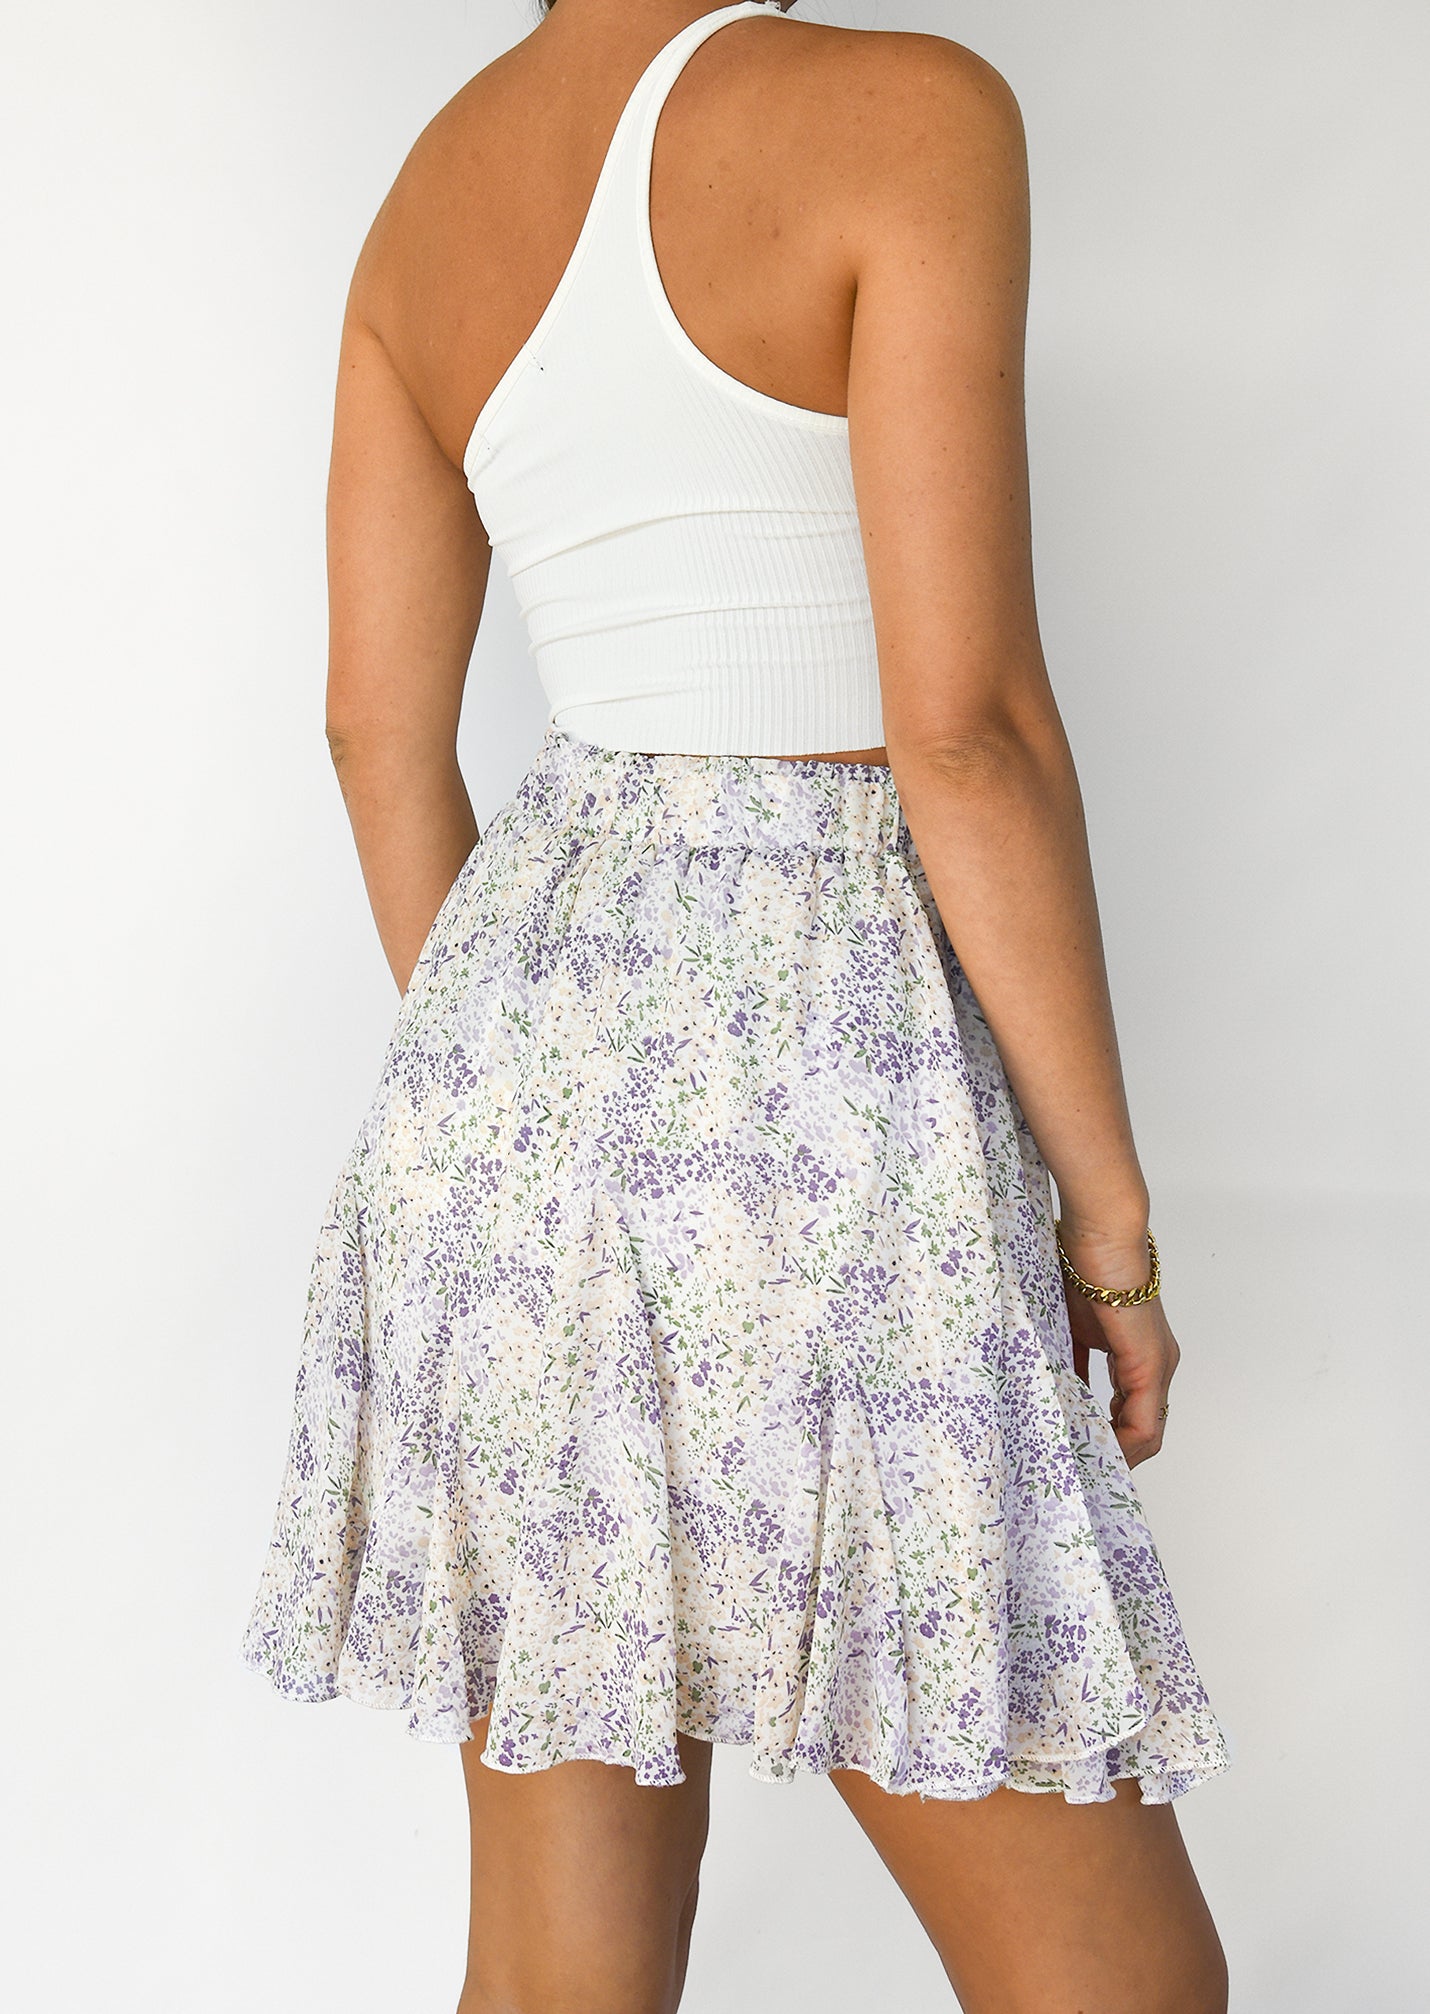 Ruffle floral skirt in lilac